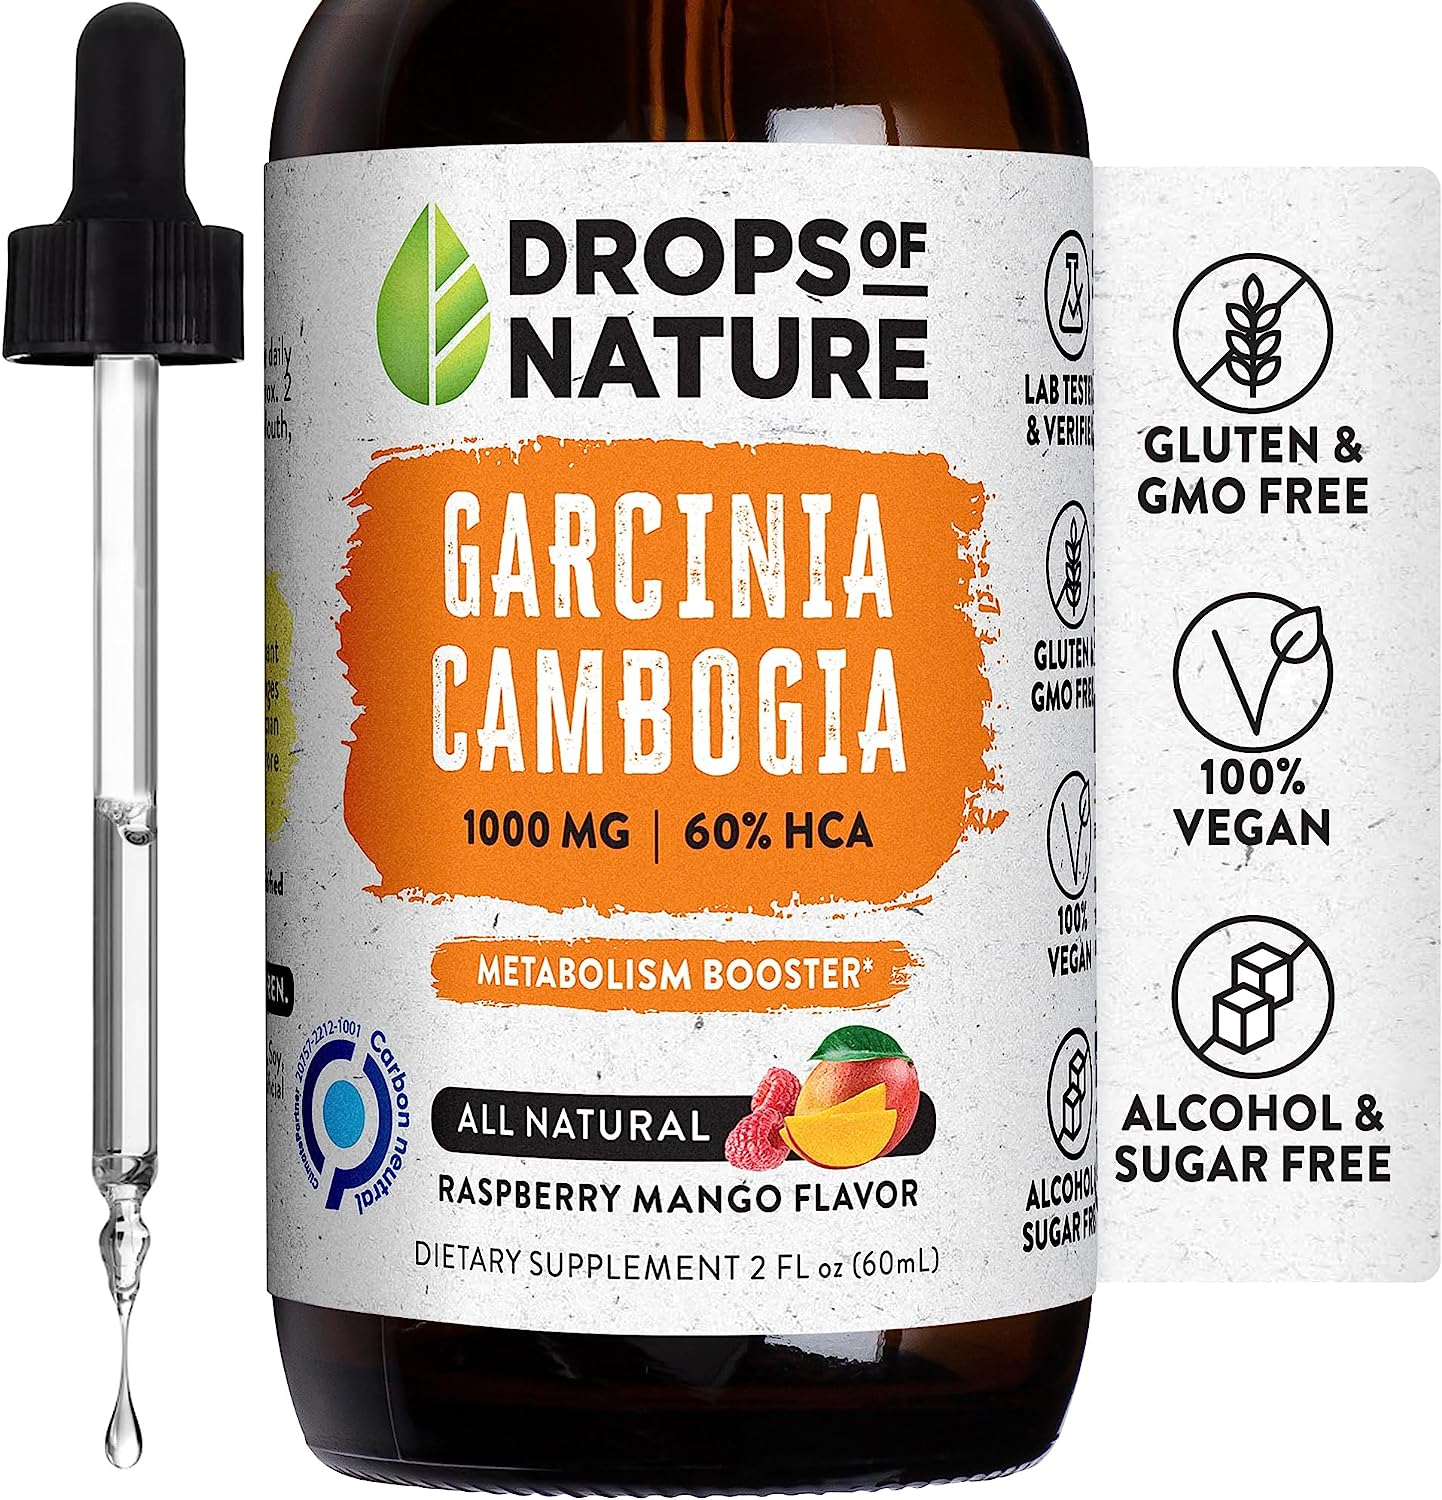 Garcinia Cambogia Appetite Suppressant for Weight Loss 2 FL Oz Bottle, liquid supplements weight loss